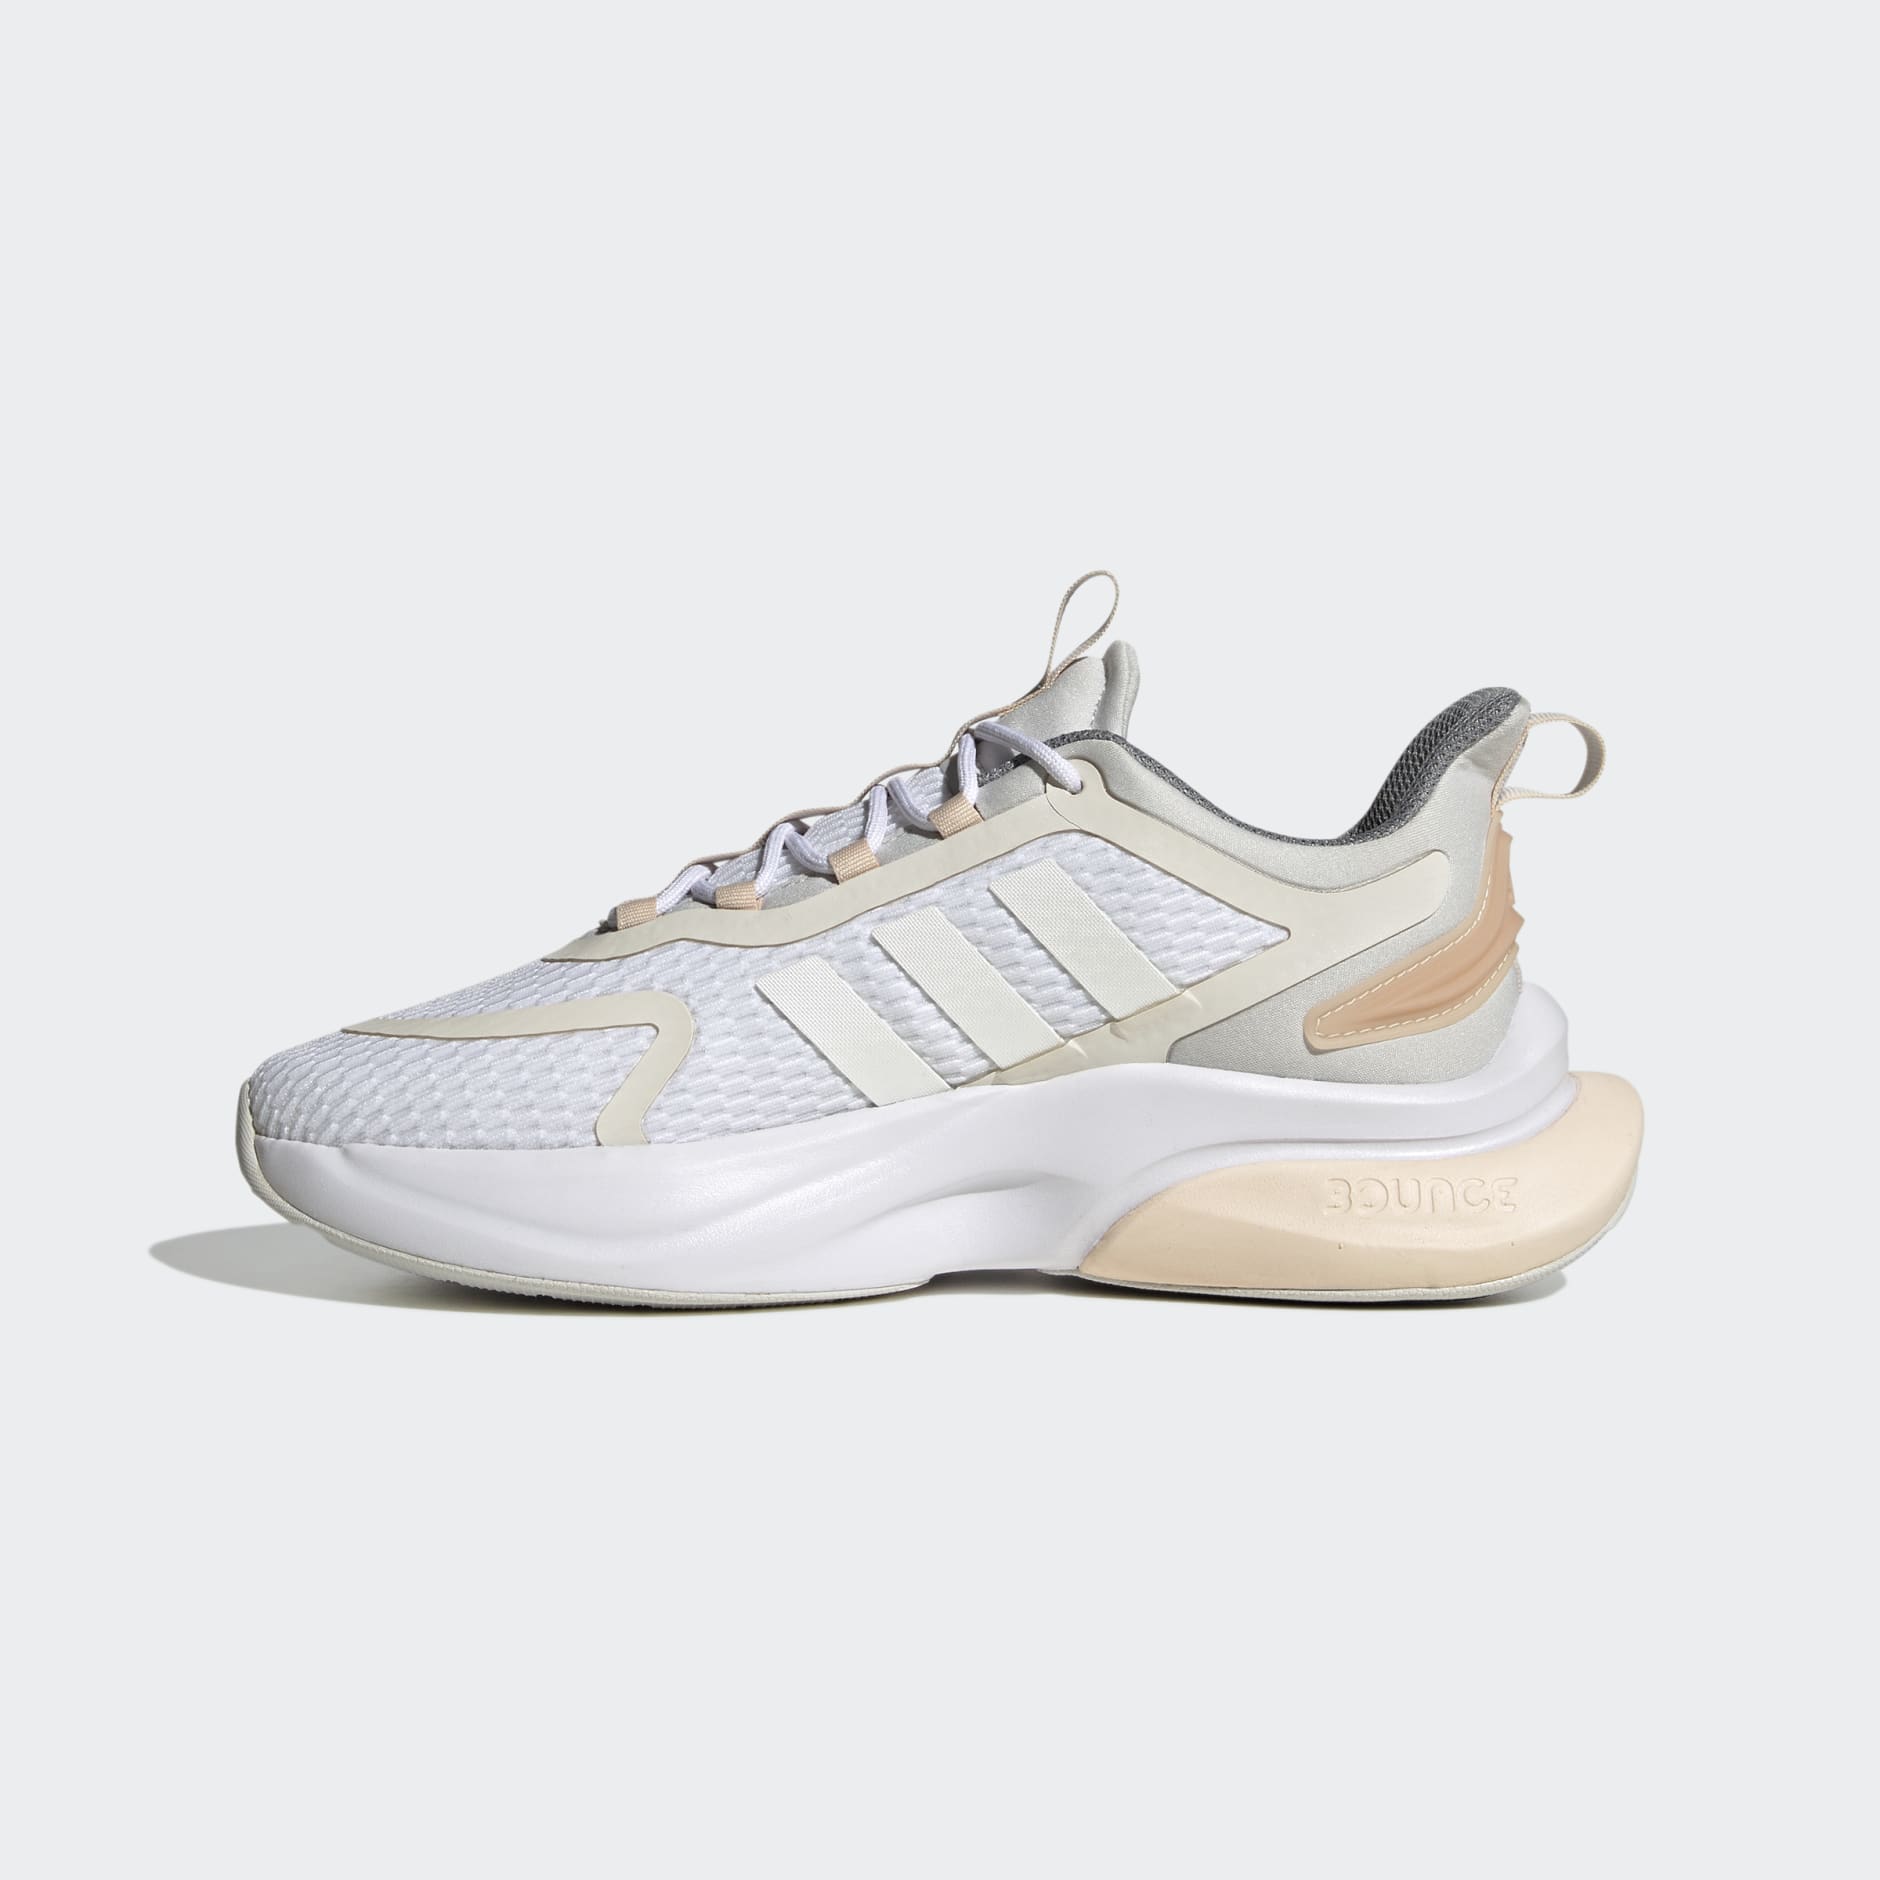 Women's Shoes - Alphabounce+ Sustainable Bounce Shoes - White